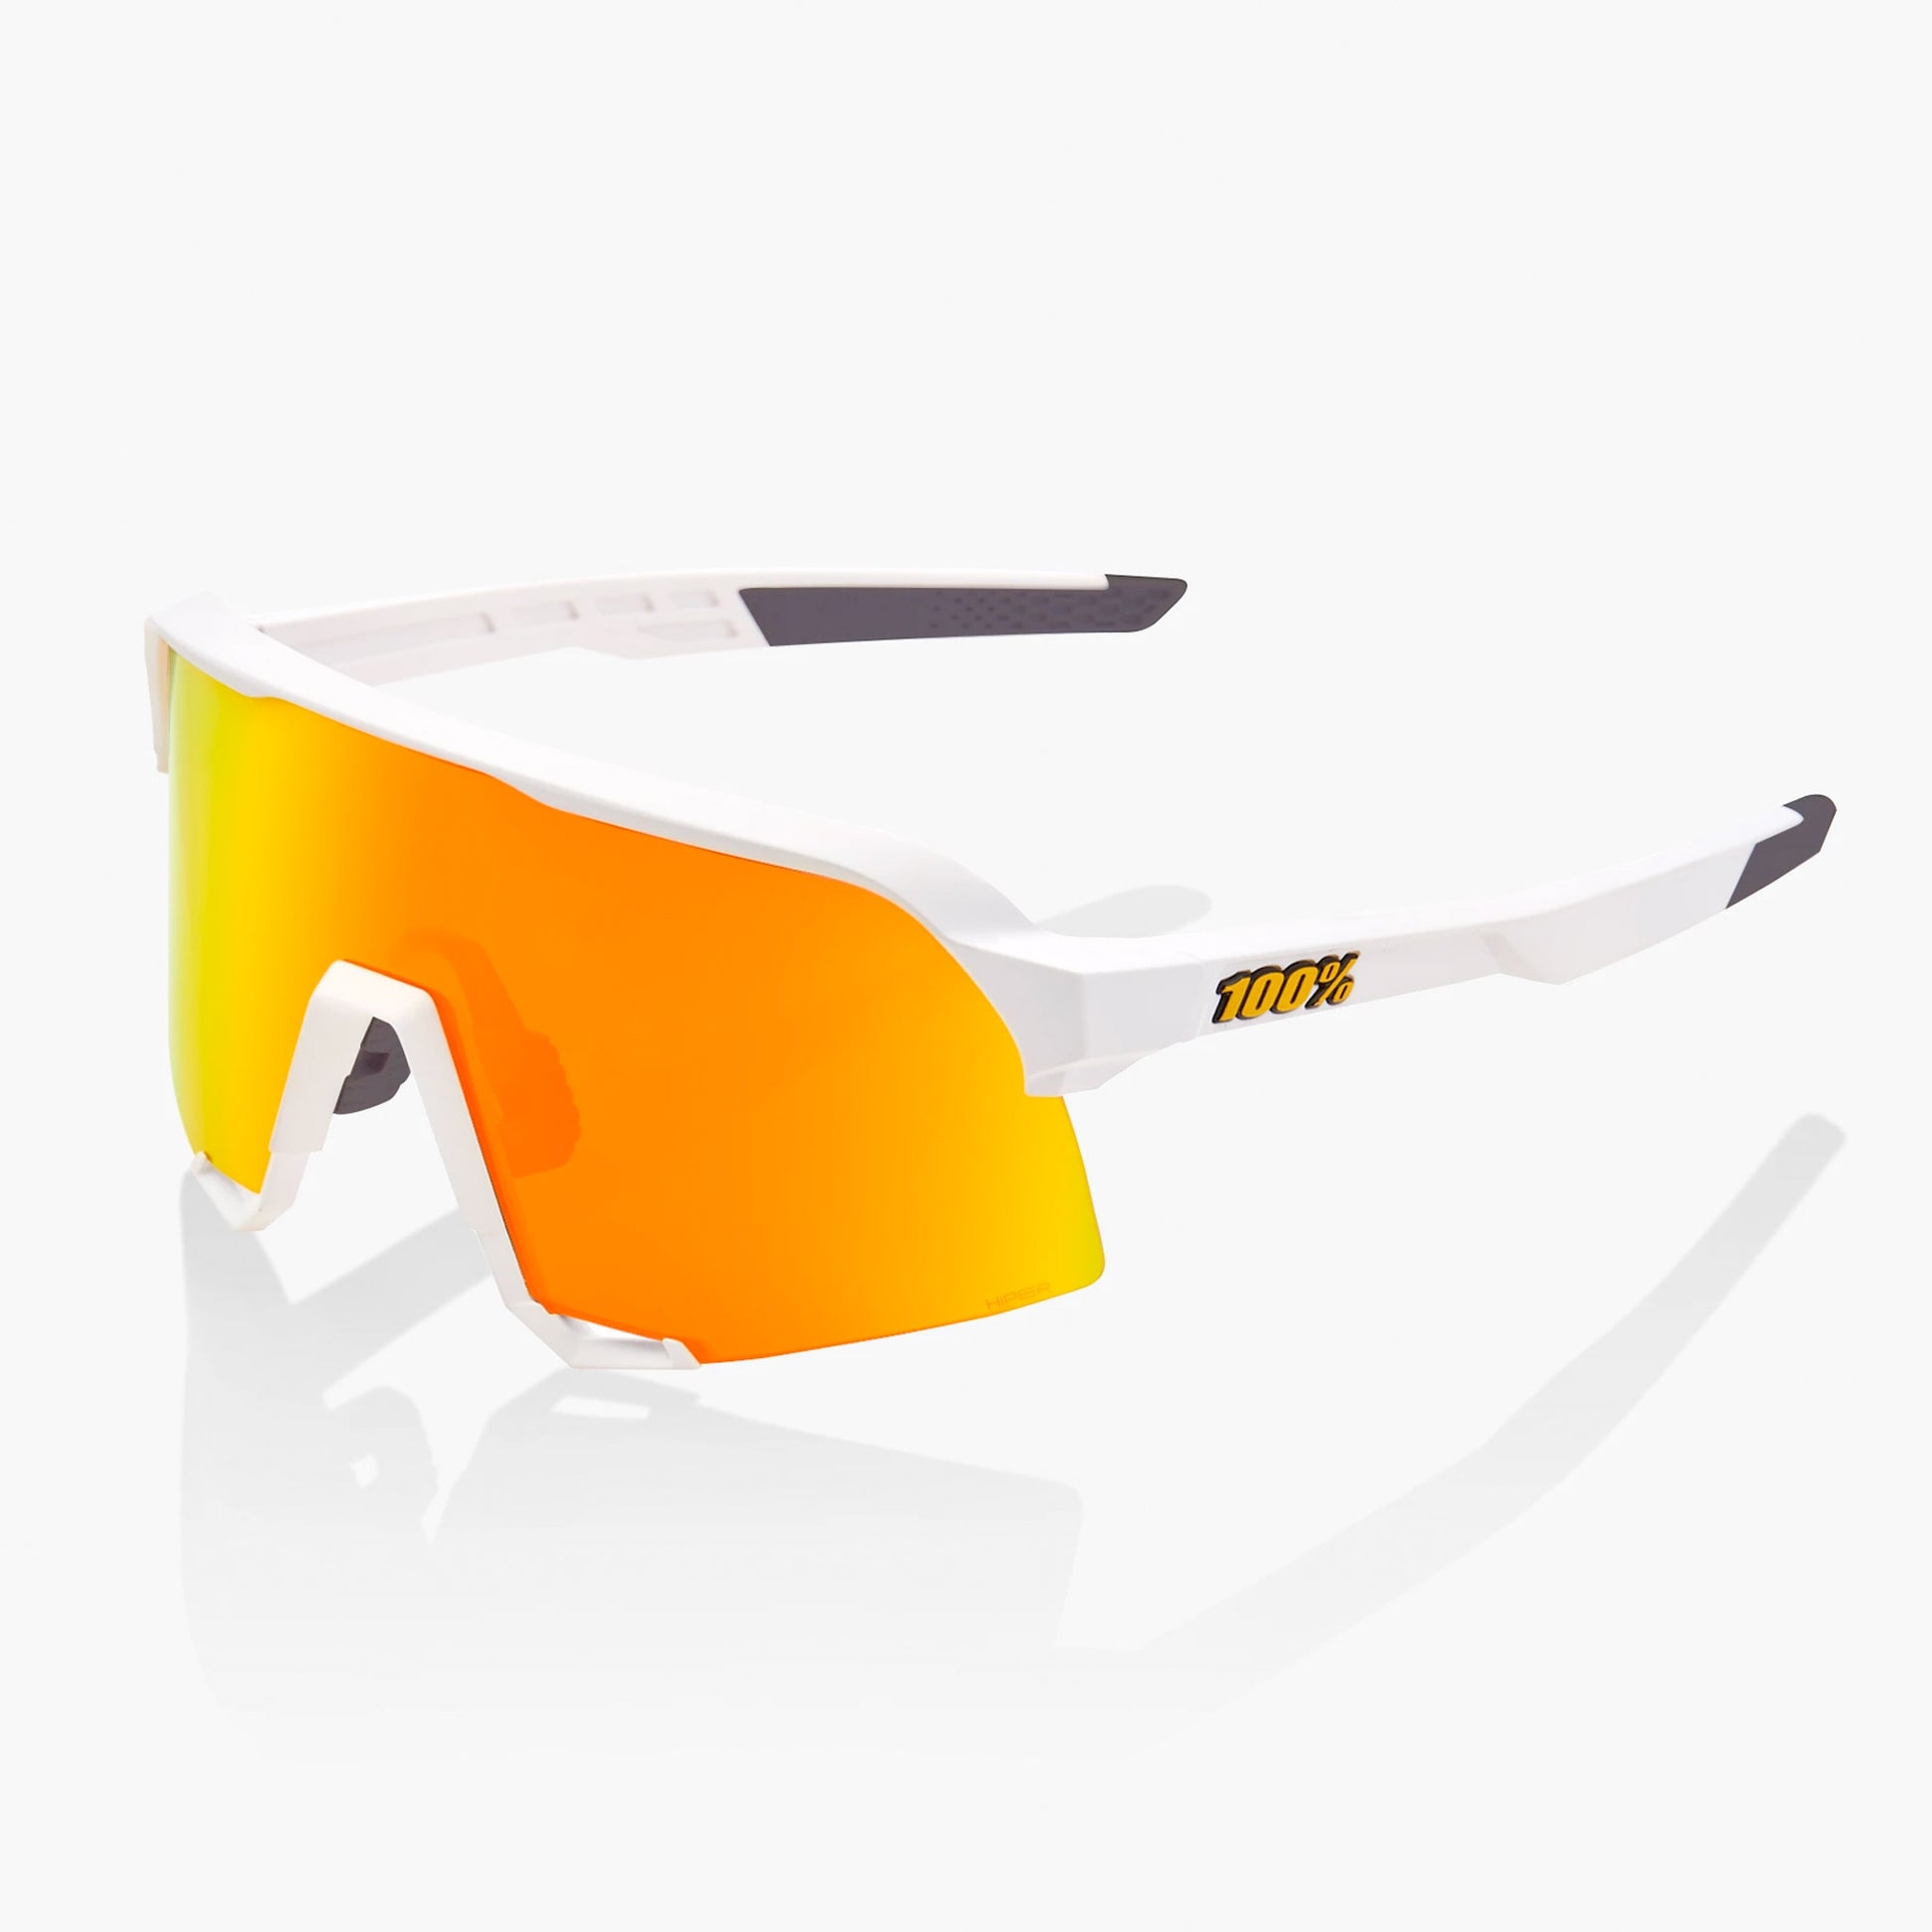 100% S3 Cycling Sunglasses - Soft Tact White With Hiper Red Multilayer Mirror Lens + Clear Lens buy online at Woolys Wheels and receive free delivery!